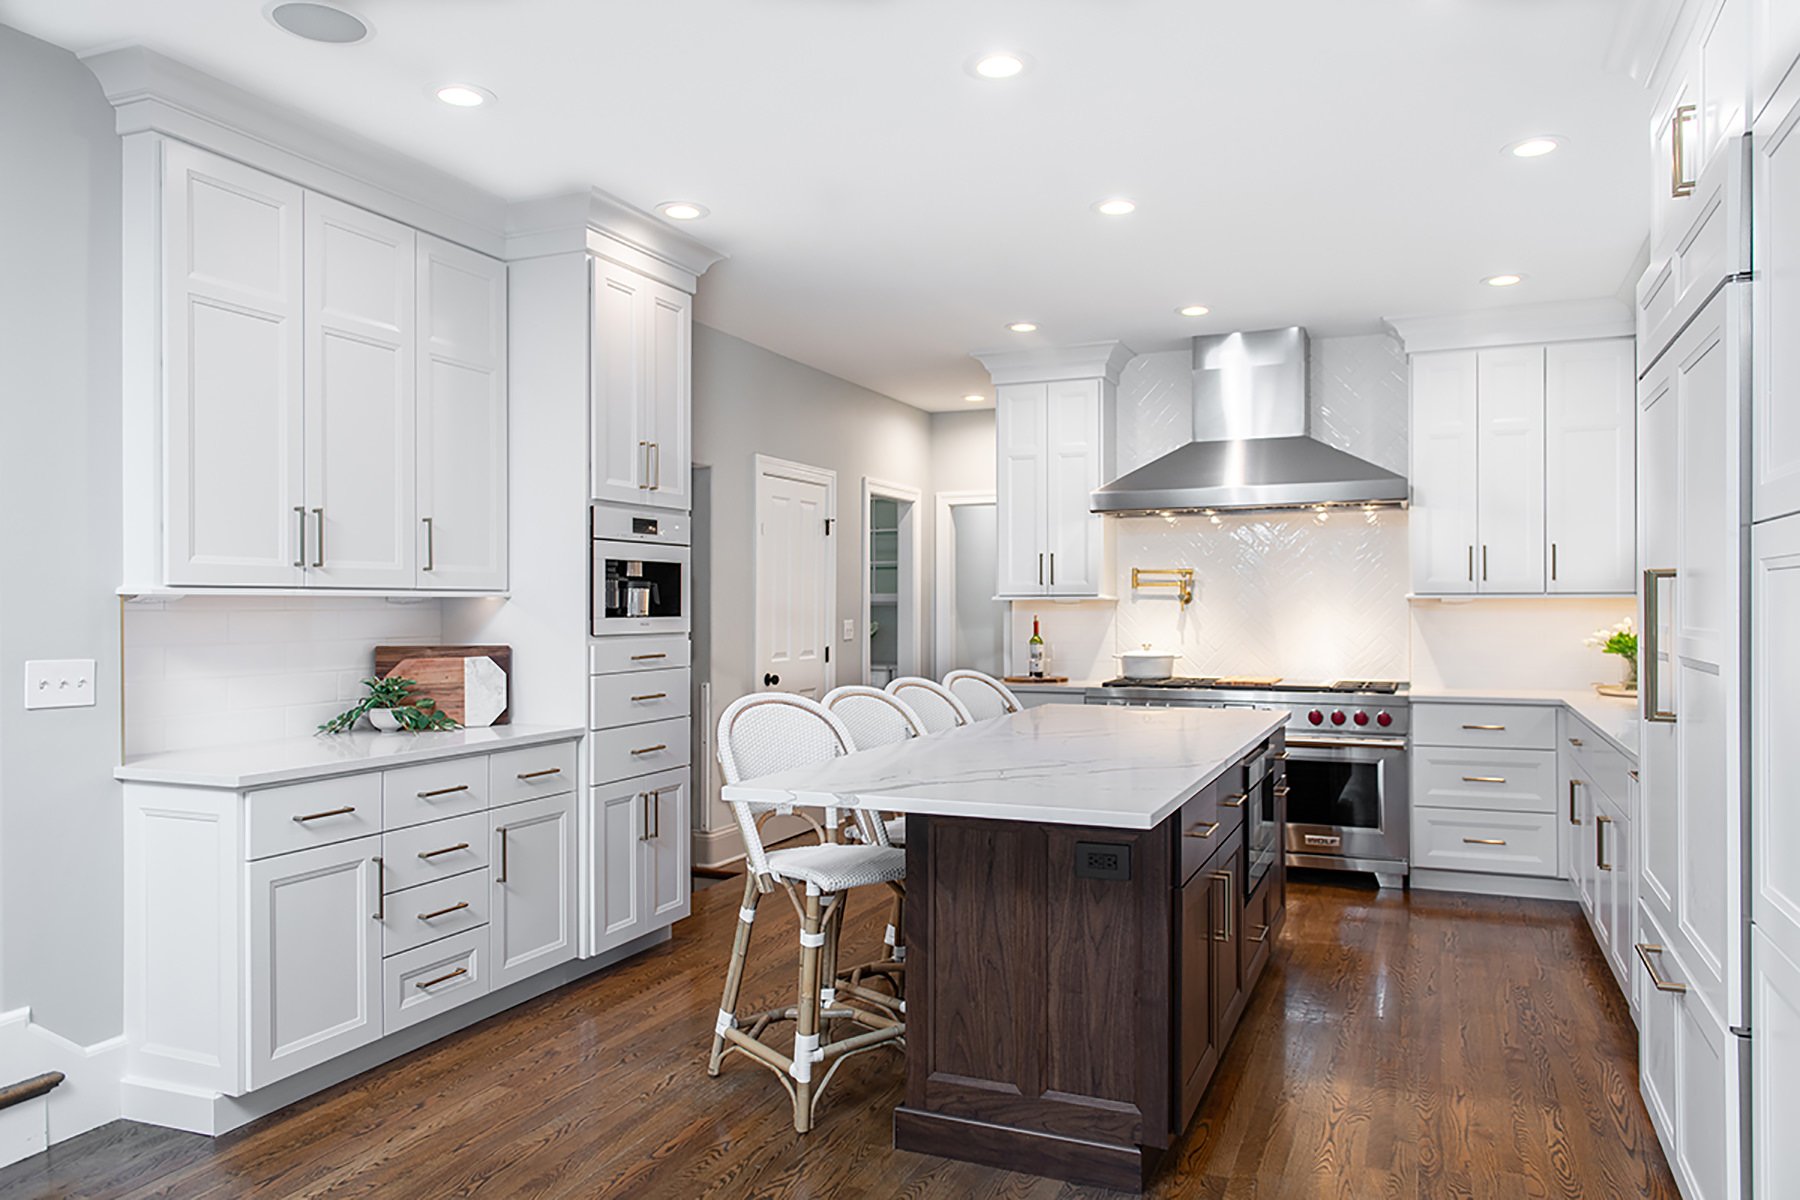 Traditional kitchen with modern finishes, white cabinets and wood flooring.